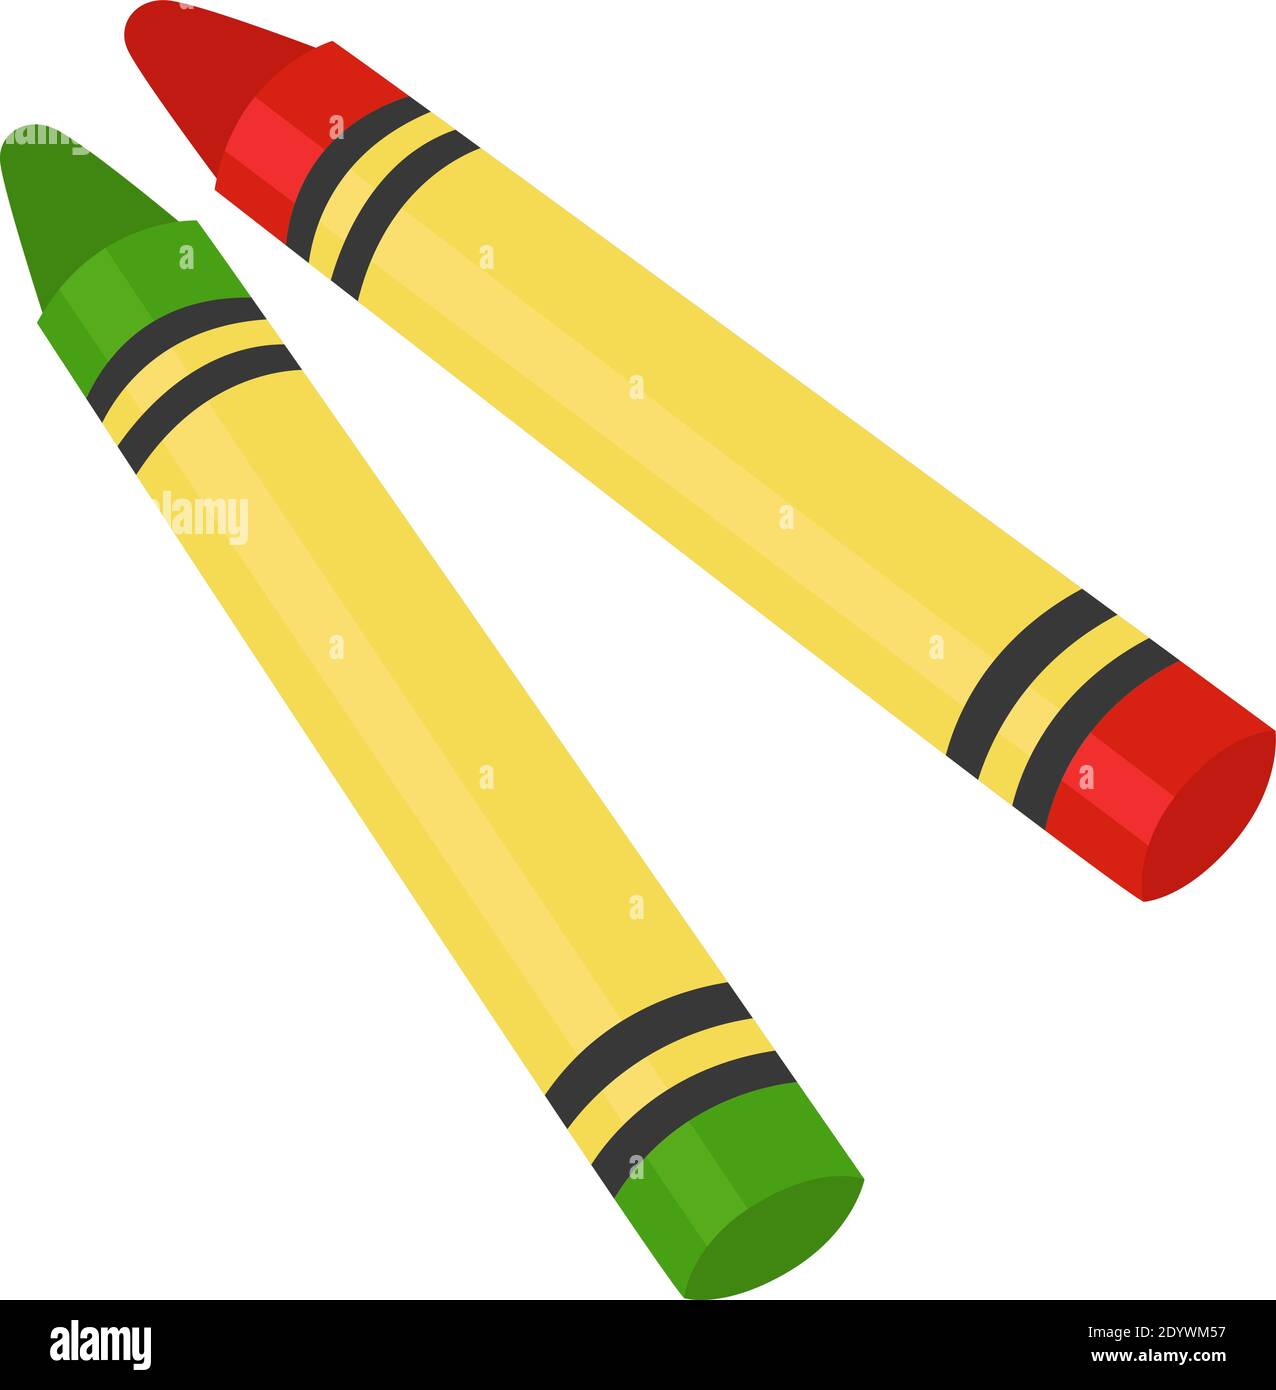 Two small wax pencils, illustration, vector on a white background. Stock Vector